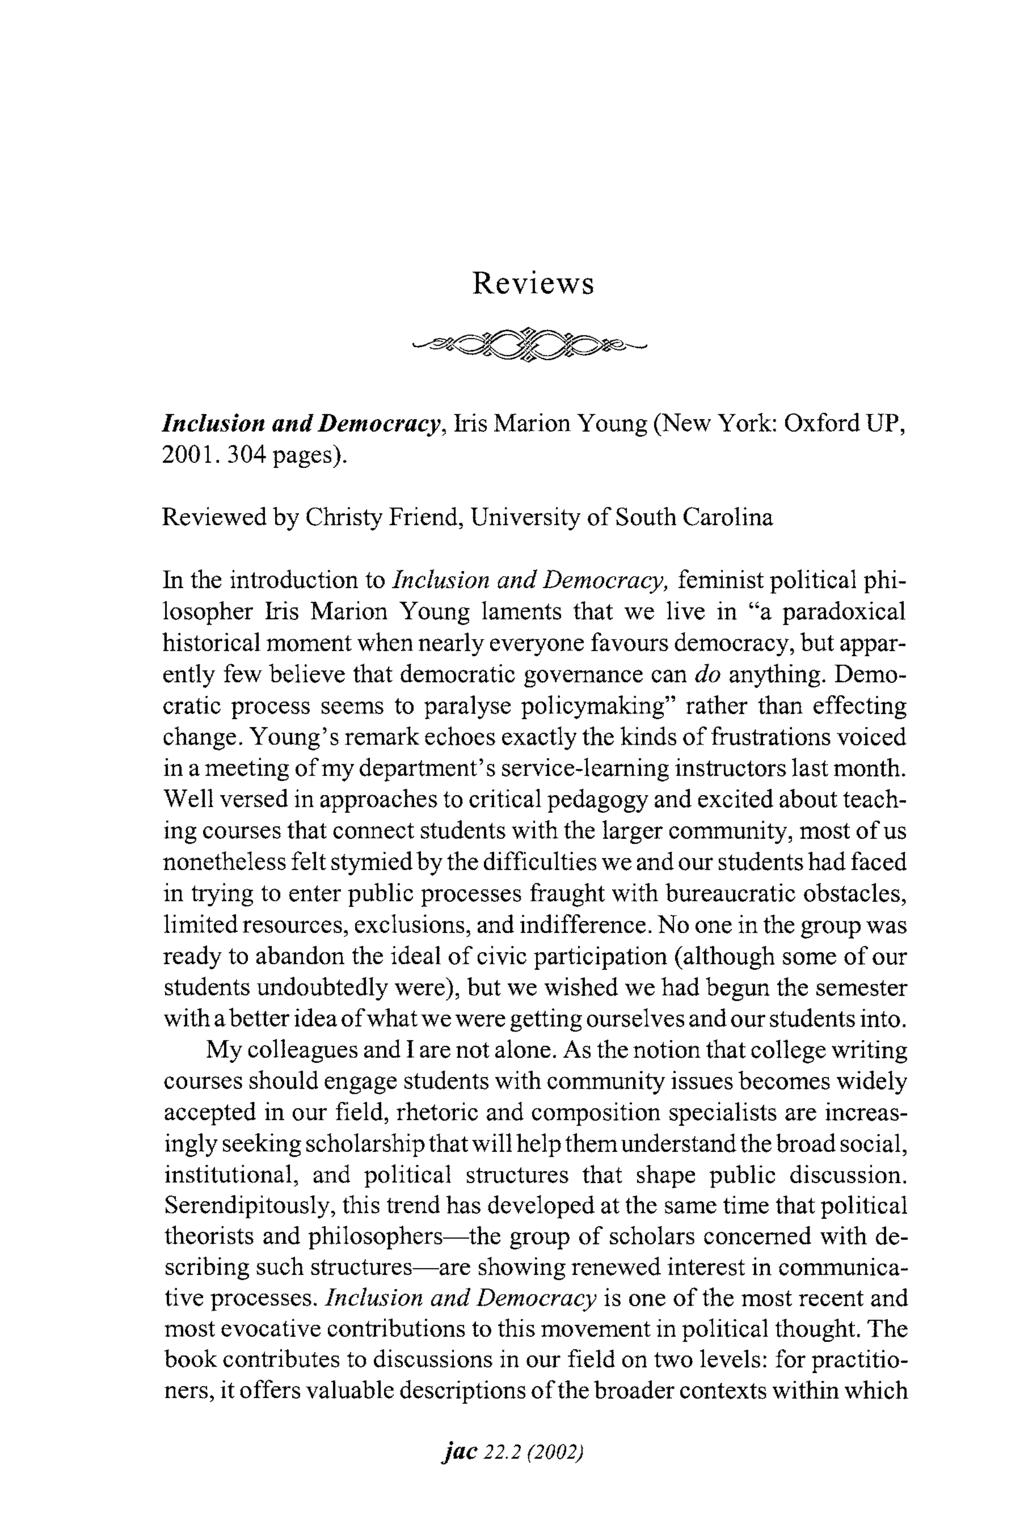 Reviews Inclusion and Democracy, Iris Marion Young (New York: Oxford UP, 2001.304 pages).